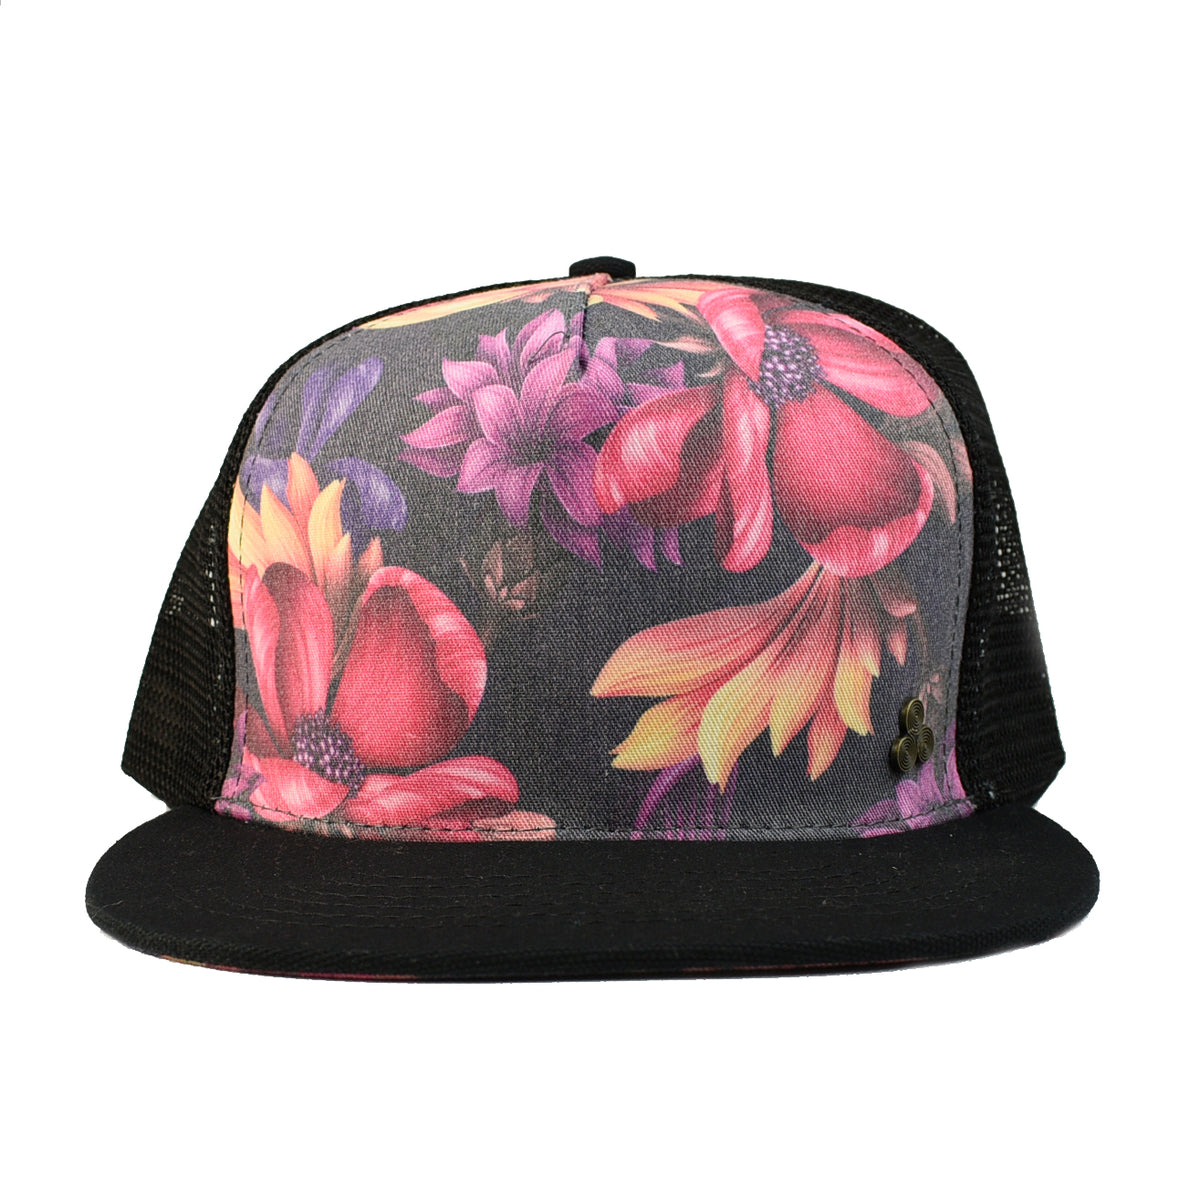 Floral Caps Women| Trucker Hat and Men for Eco-Friendly